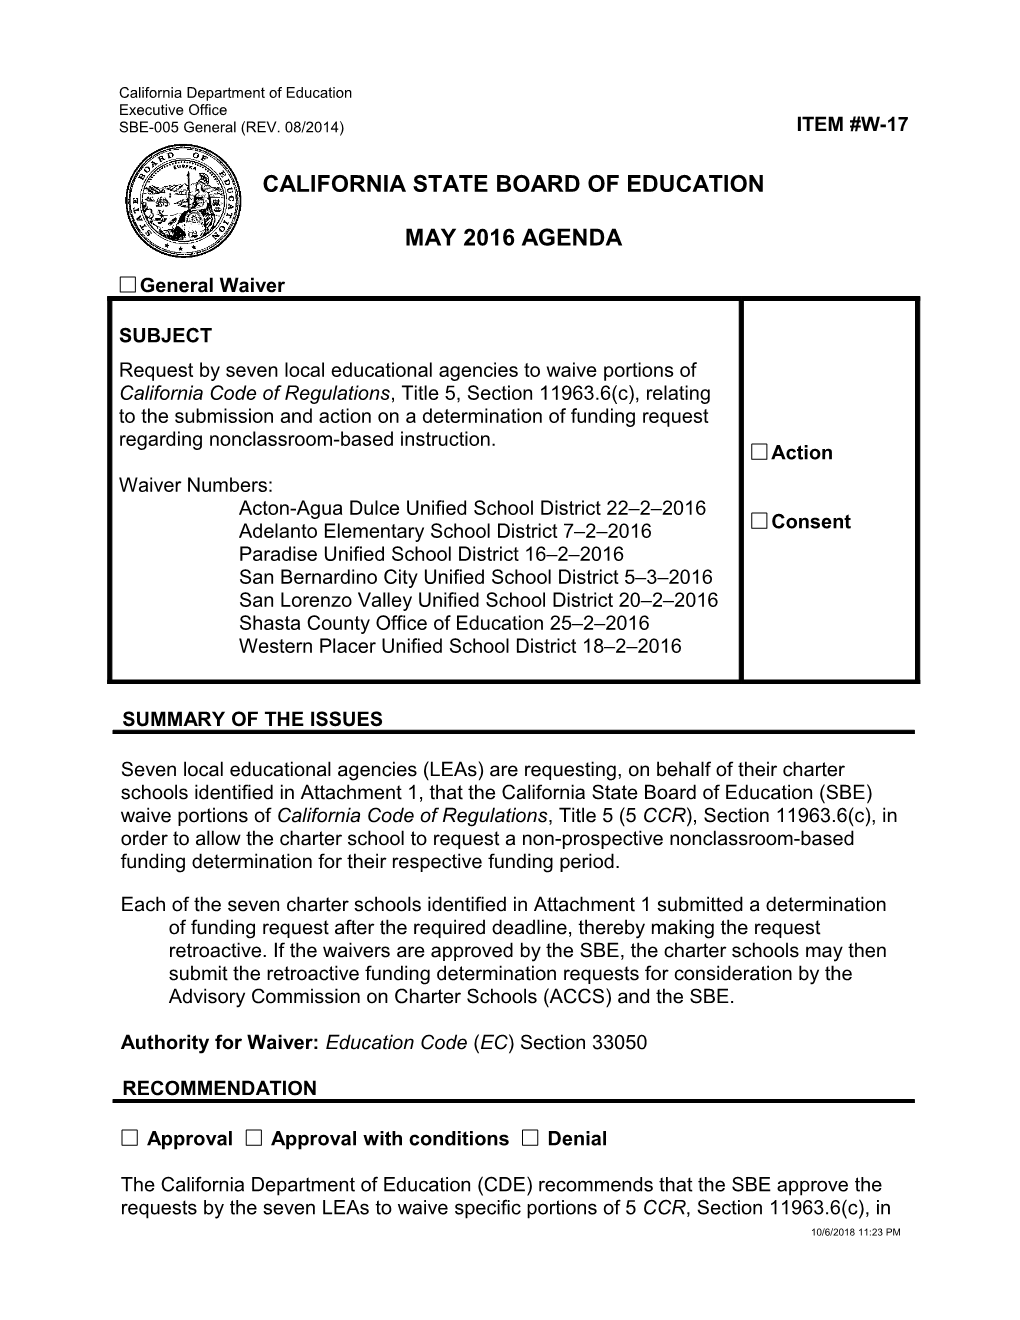 May 2016 Waiver Item W-17 - Meeting Agendas (CA State Board of Education)